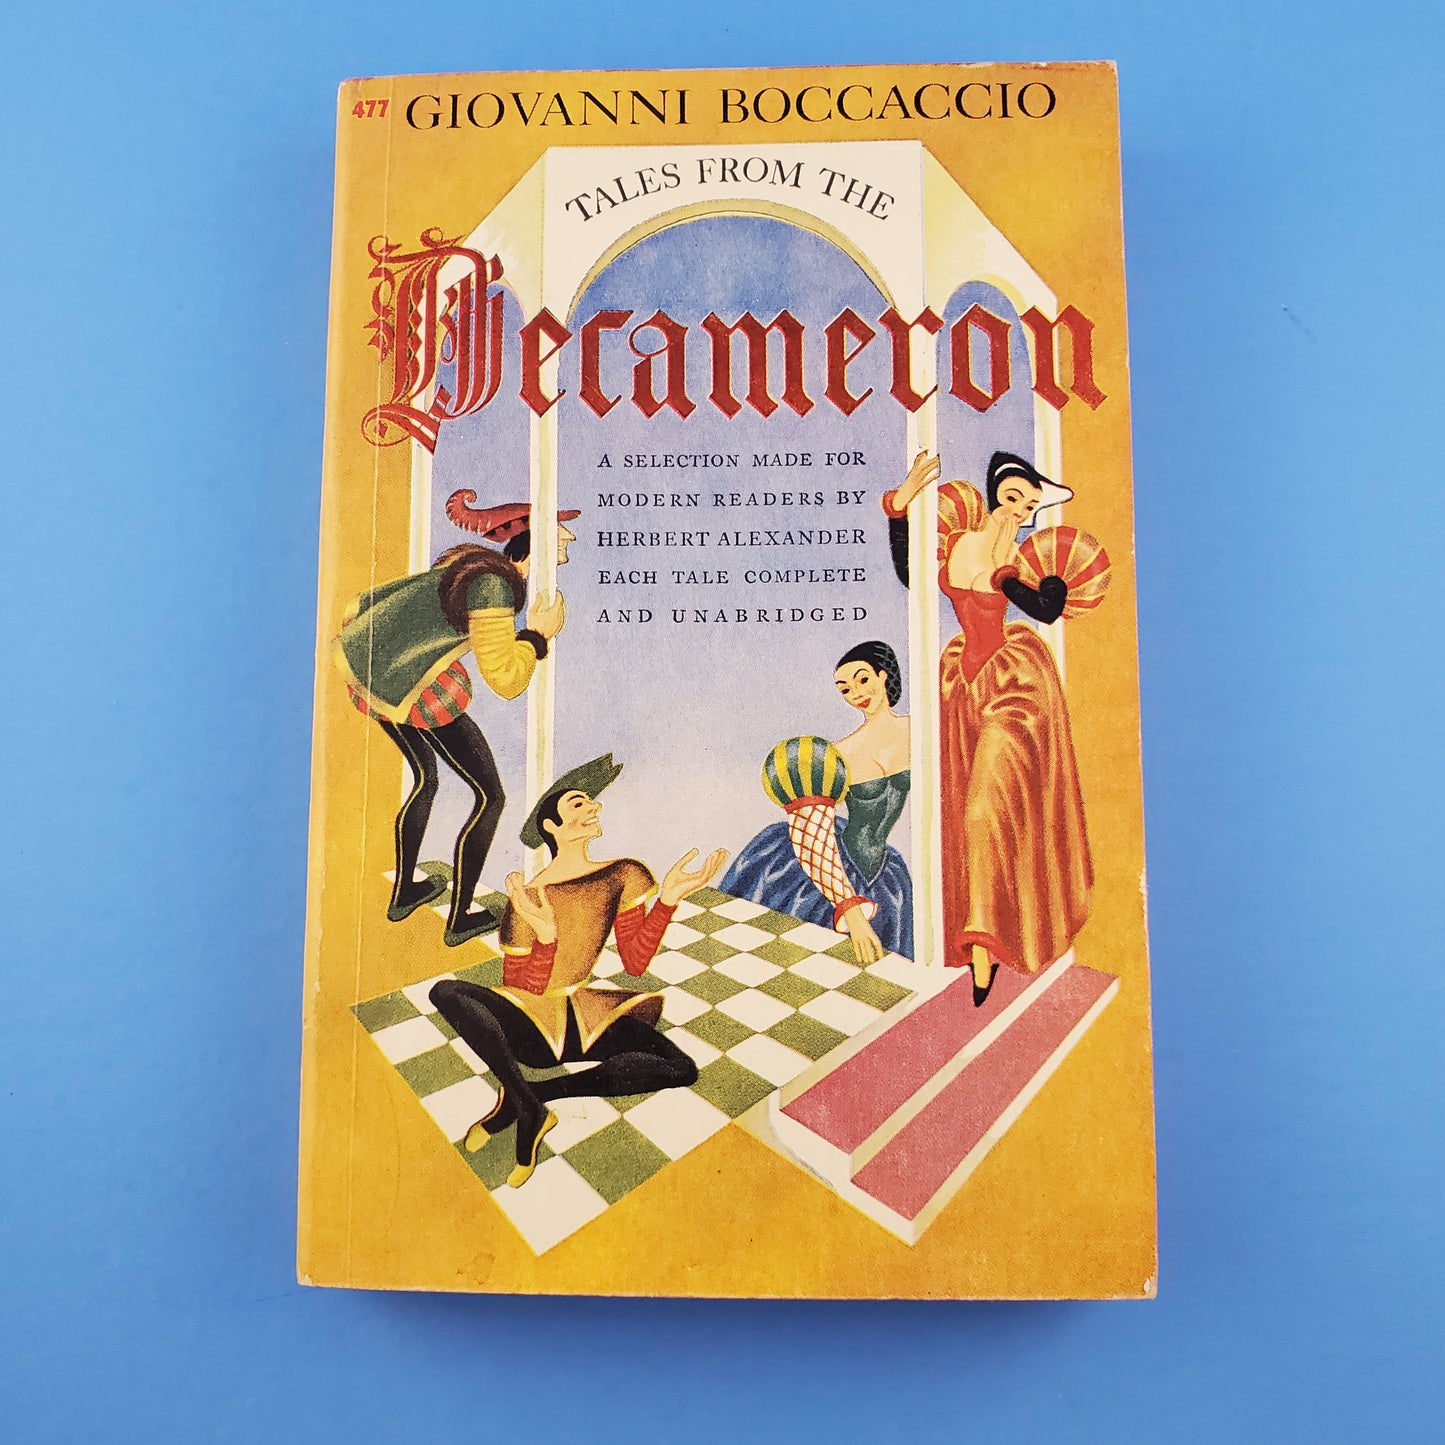 Tales From The Decameron